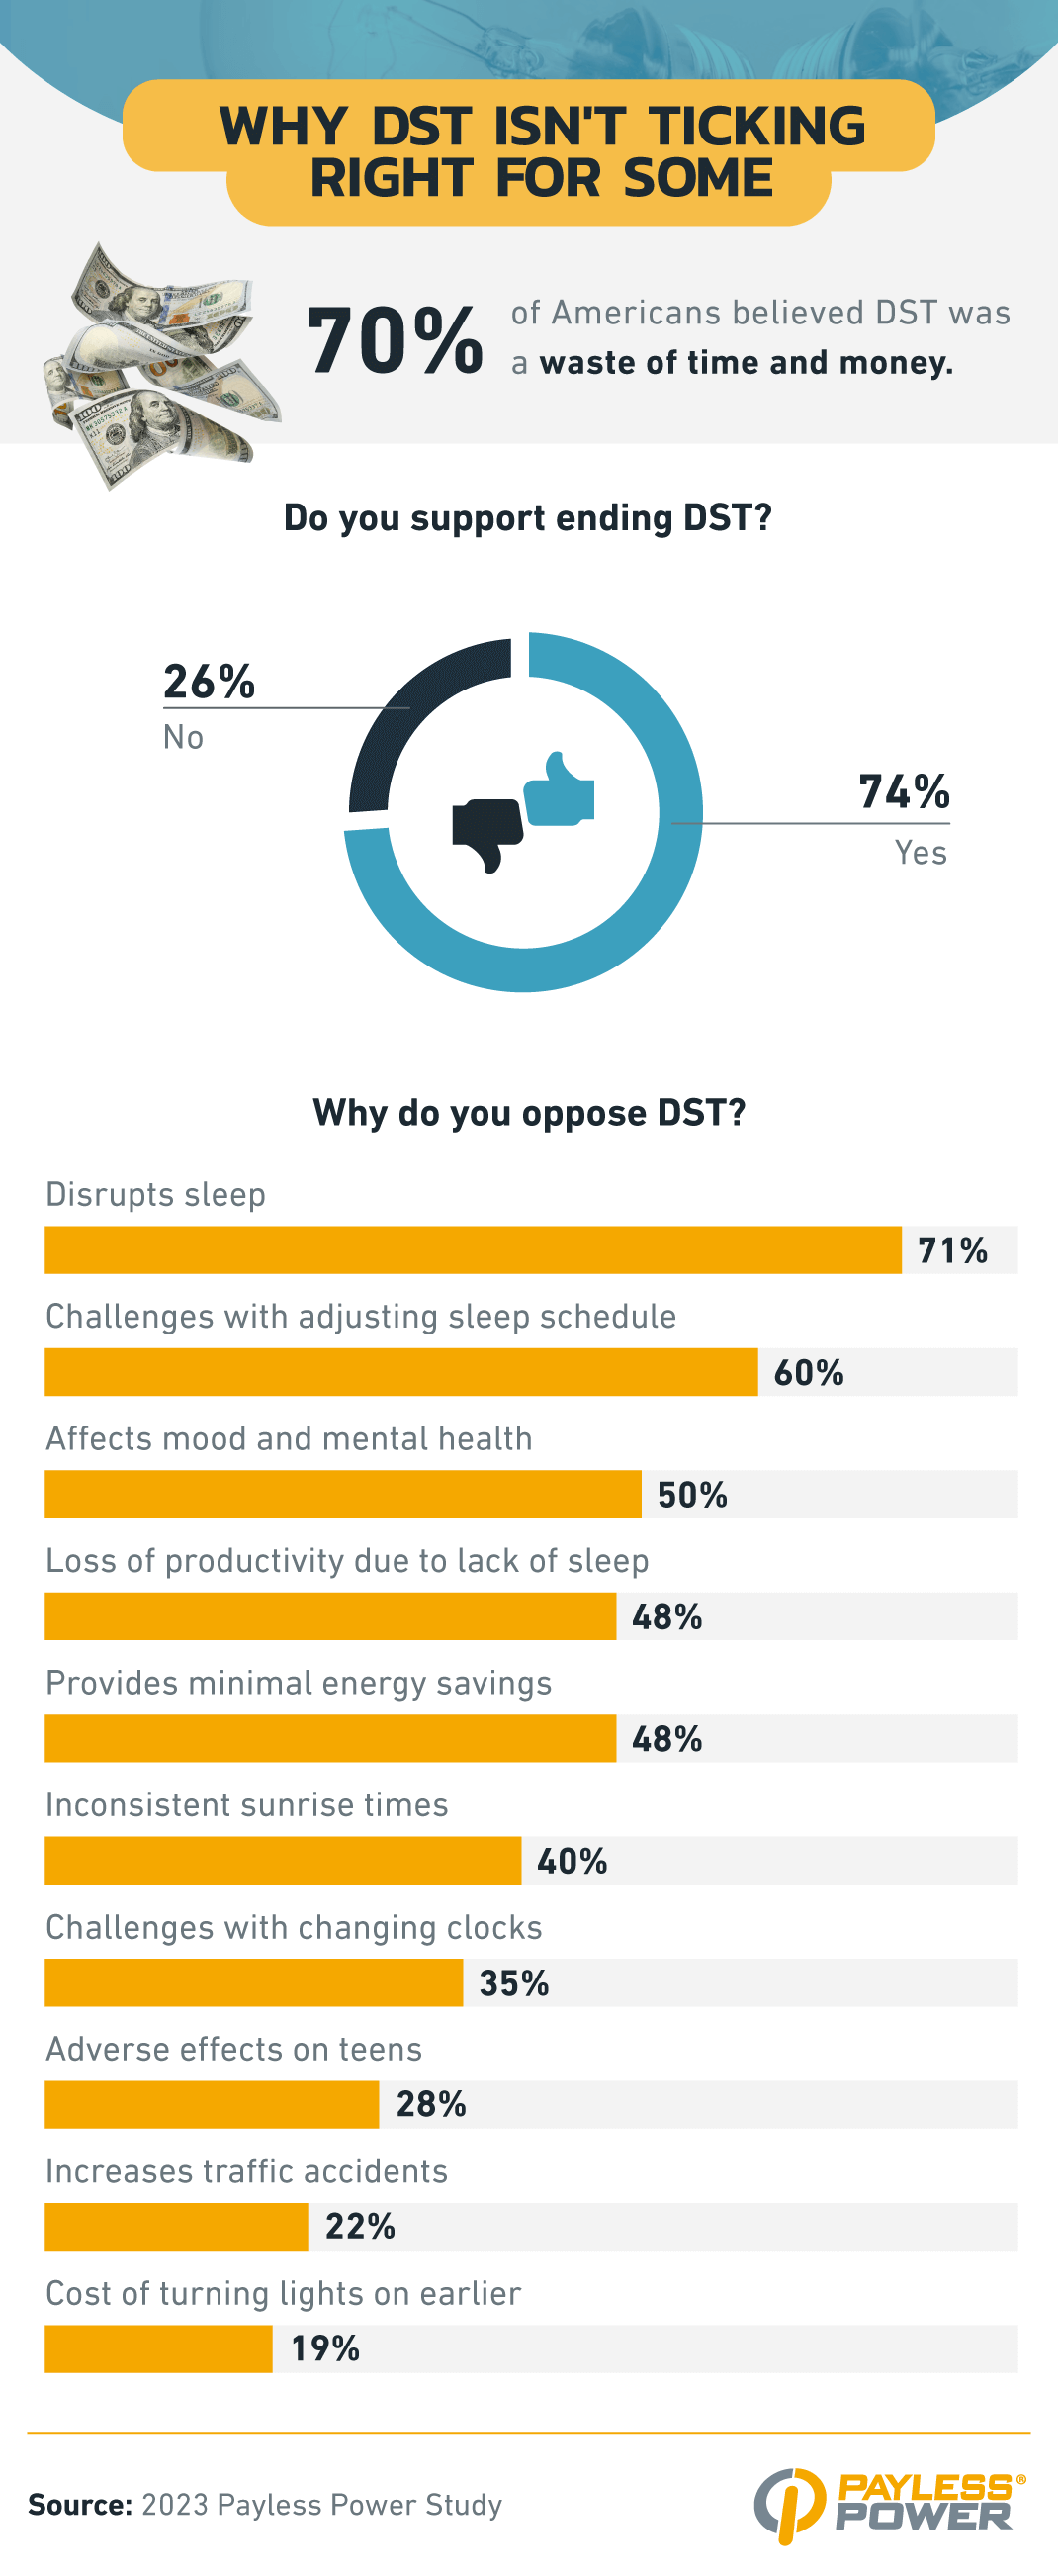 Support for ending dst